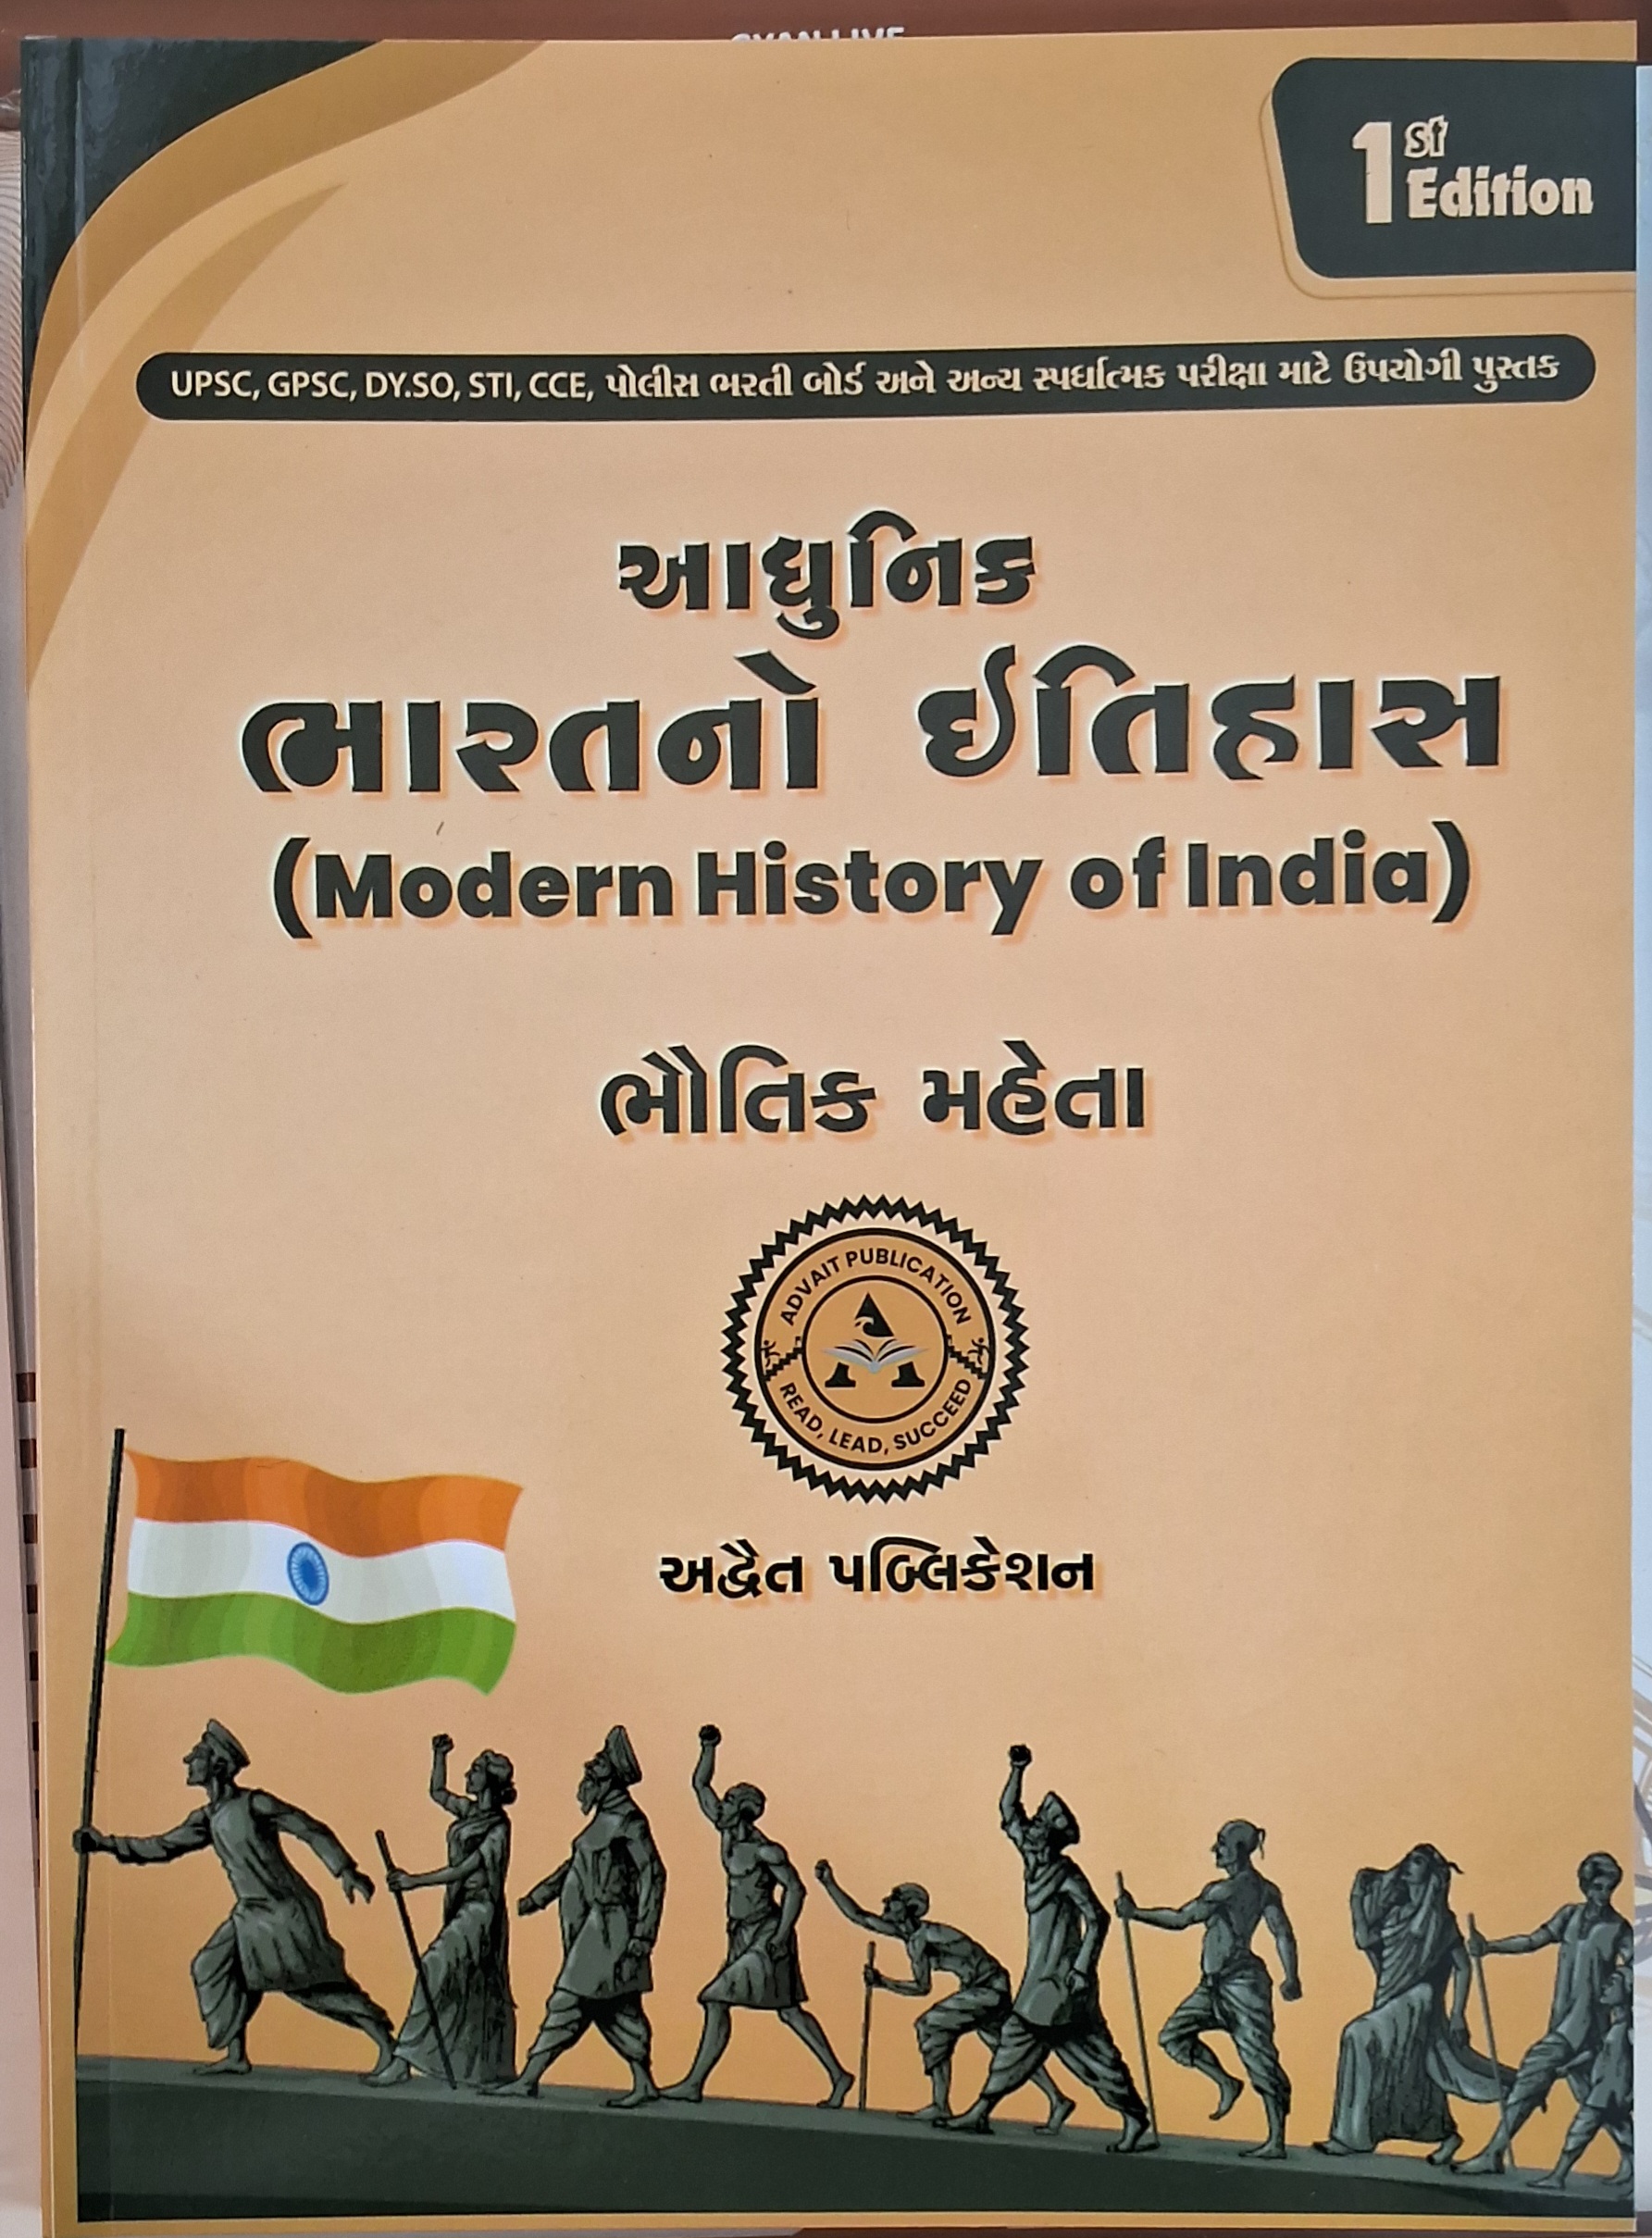 A Brief History Of Modern Indian-bhotik Mehta Sur- 1 Edison-2024 